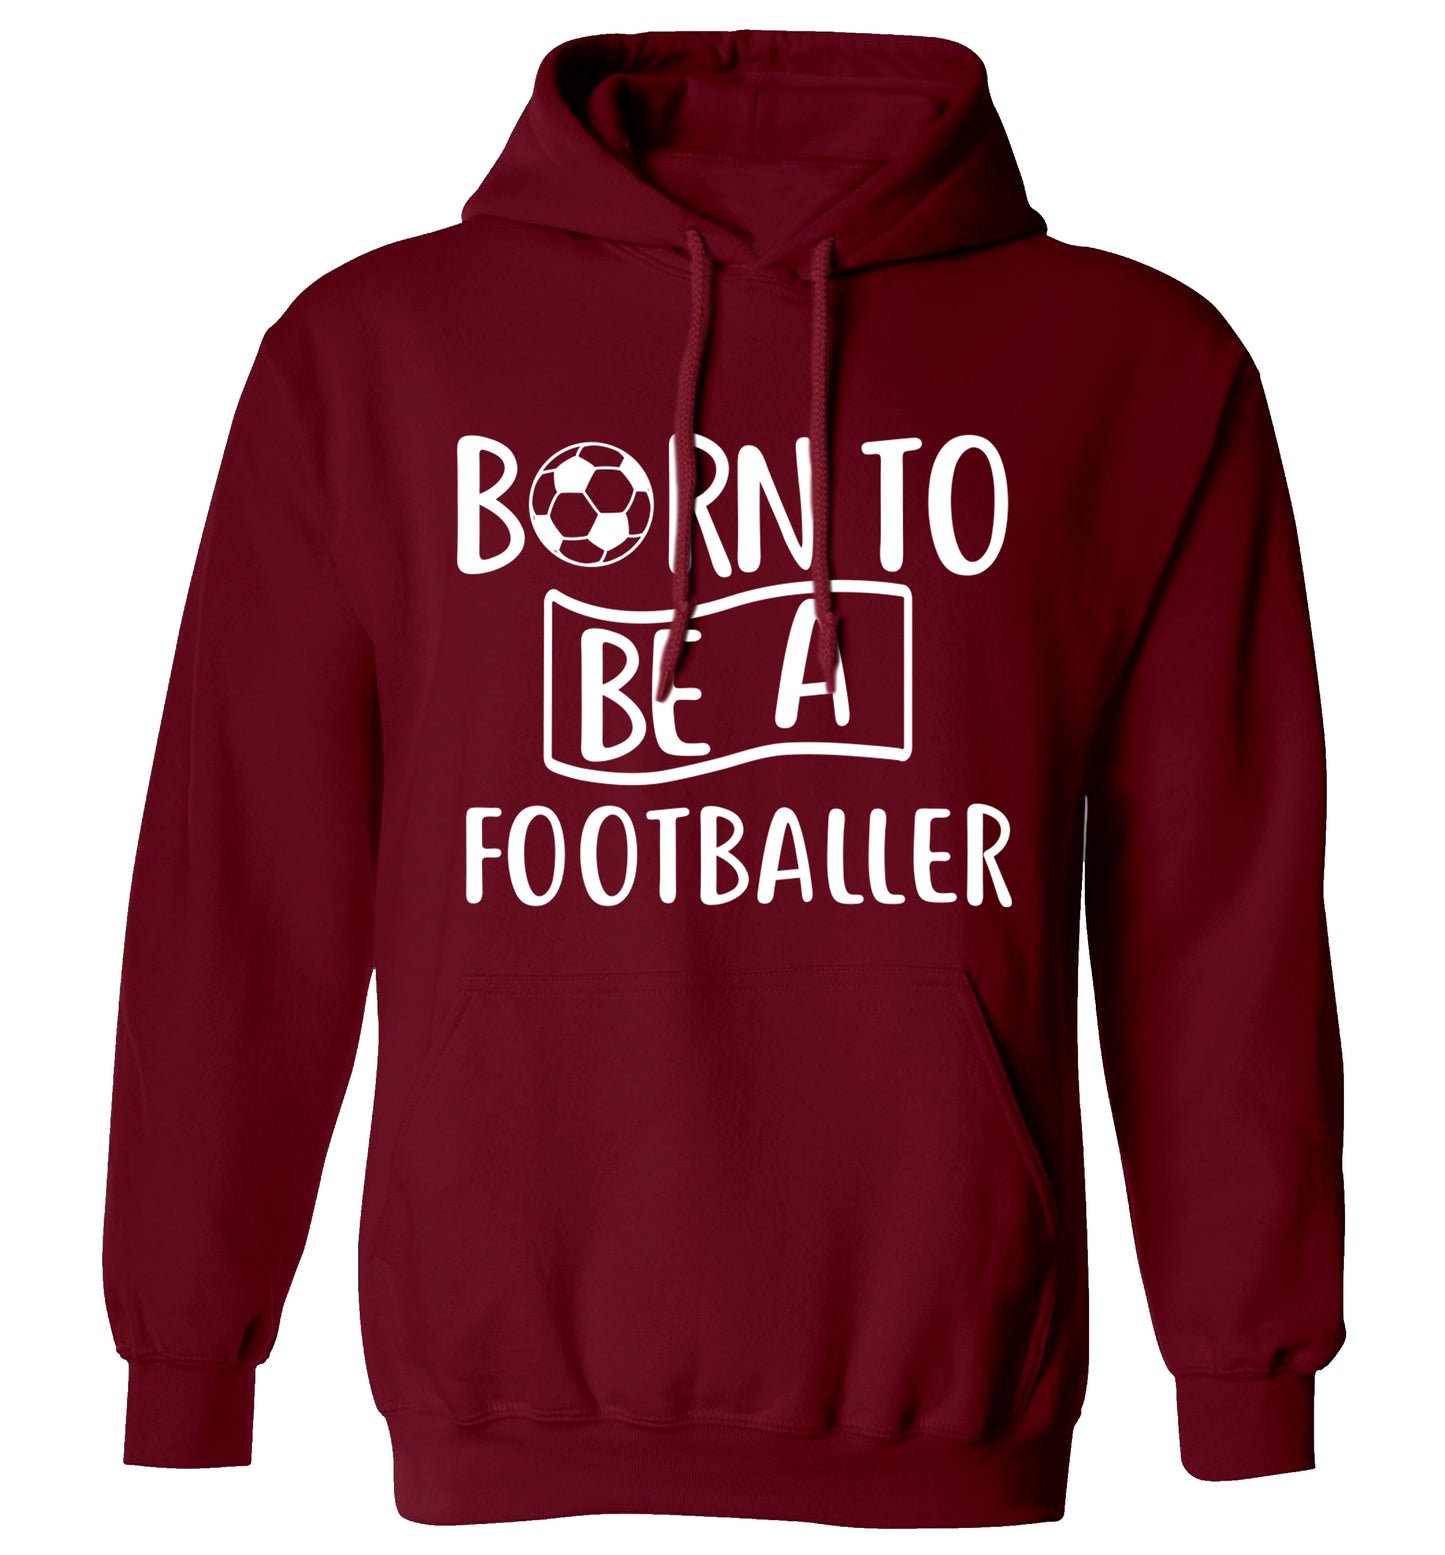 Born to be a footballer adults unisexmaroon hoodie 2XL